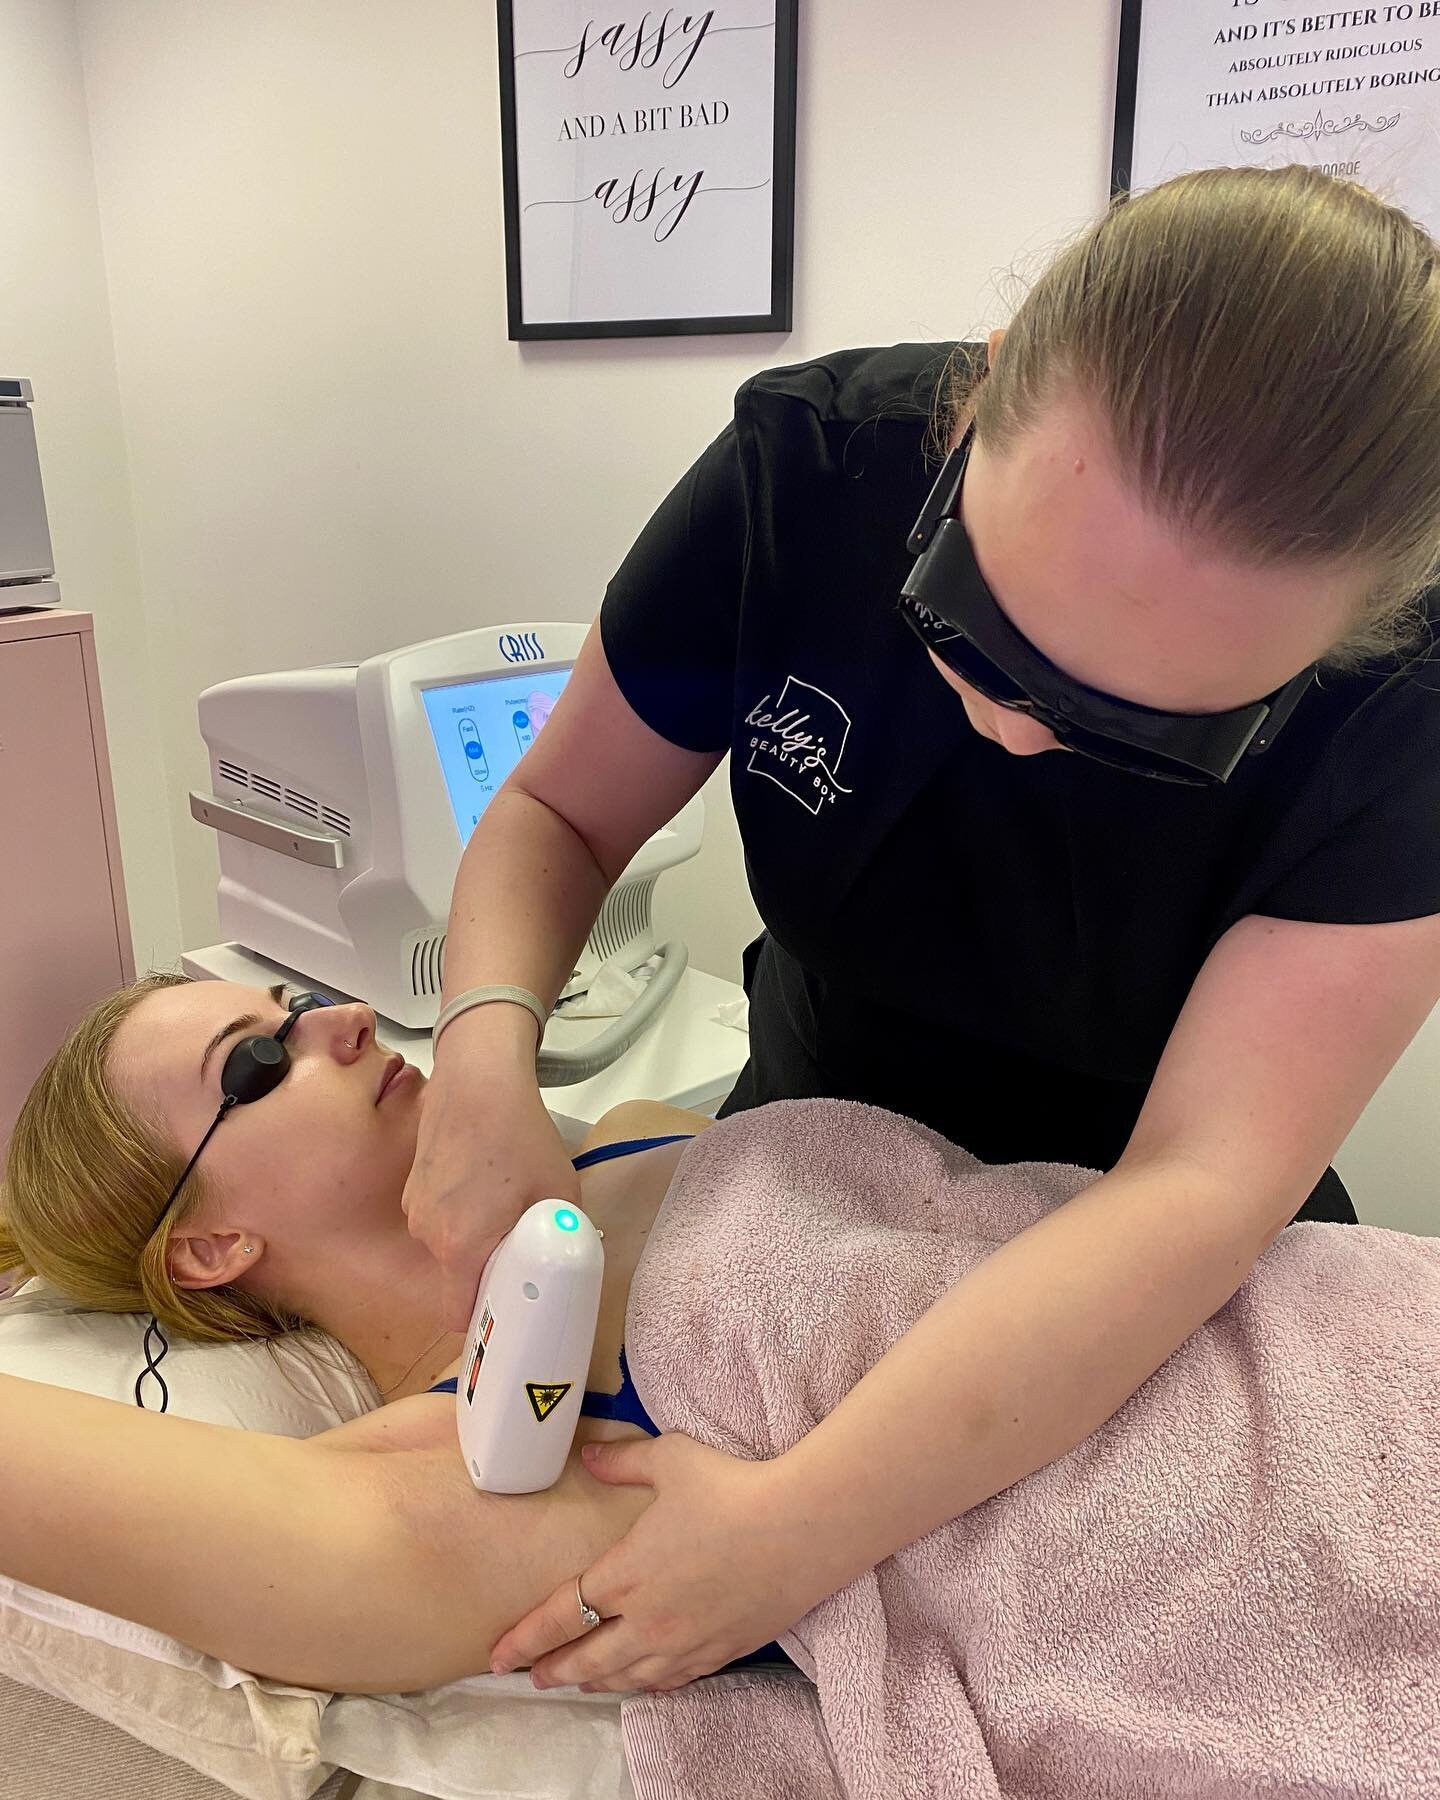 Summer is nearly upon us ☀️&thinsp;&thinsp;
&thinsp;&thinsp;
Why not be hair free this summer! 👙&thinsp;&thinsp;
&thinsp;&thinsp;
Book a free consultation today with our Laser therapist Isobelle. &thinsp;_kellys_beauty_box_ &thinsp;
&thinsp;&thinsp;